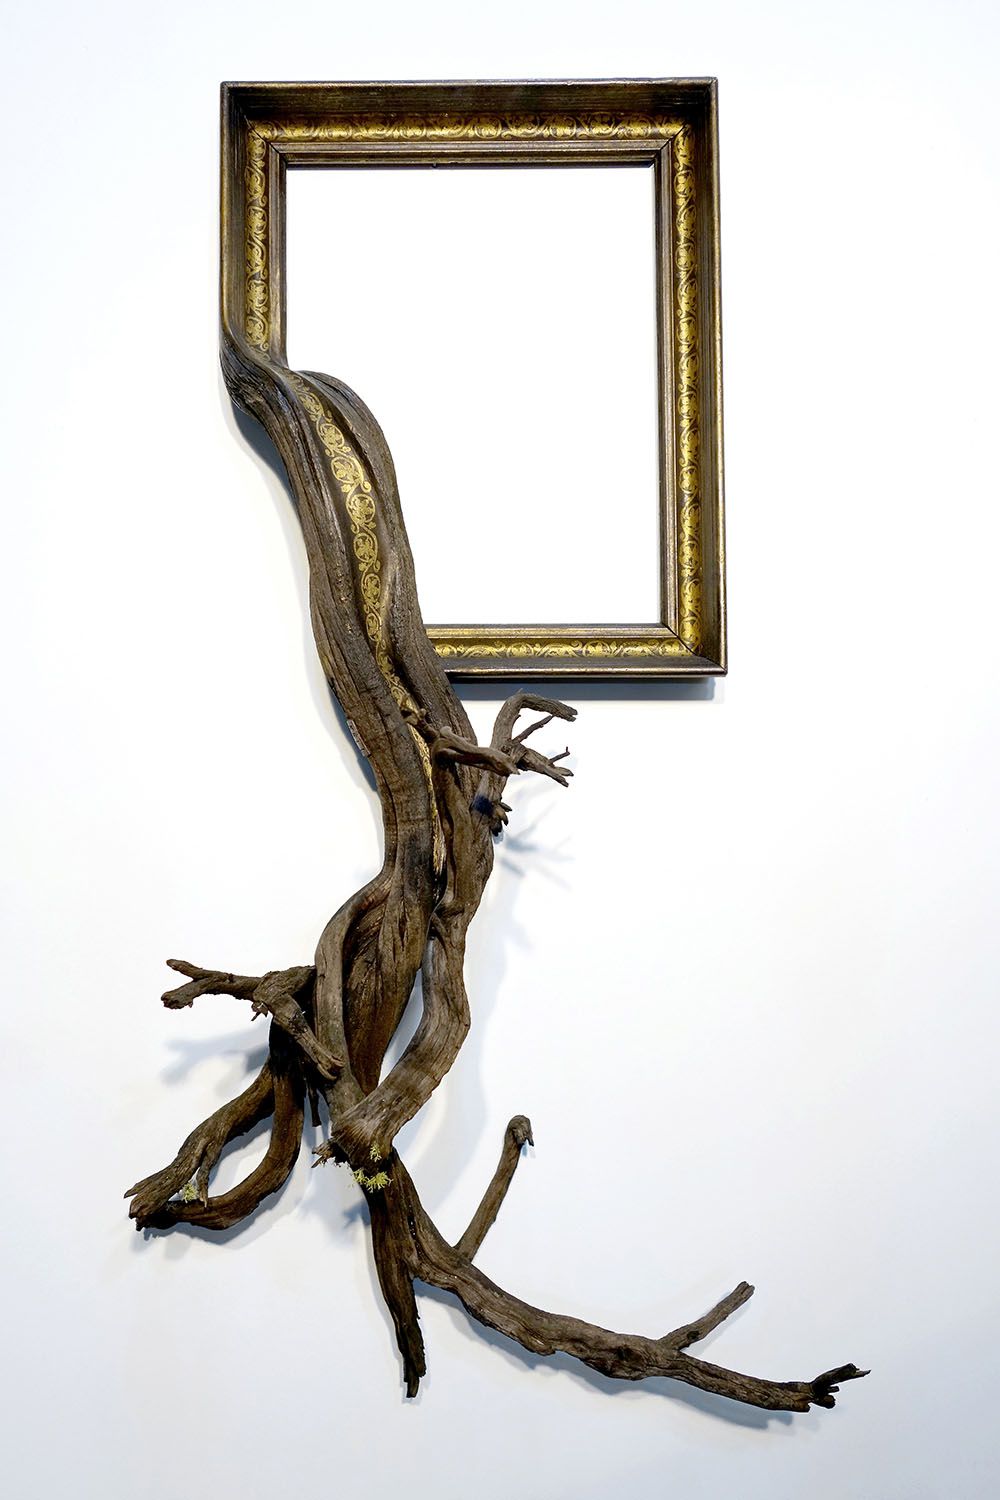 Tree Roots And Branches Fused With Ornate Picture Frames By Darryl Cox 13